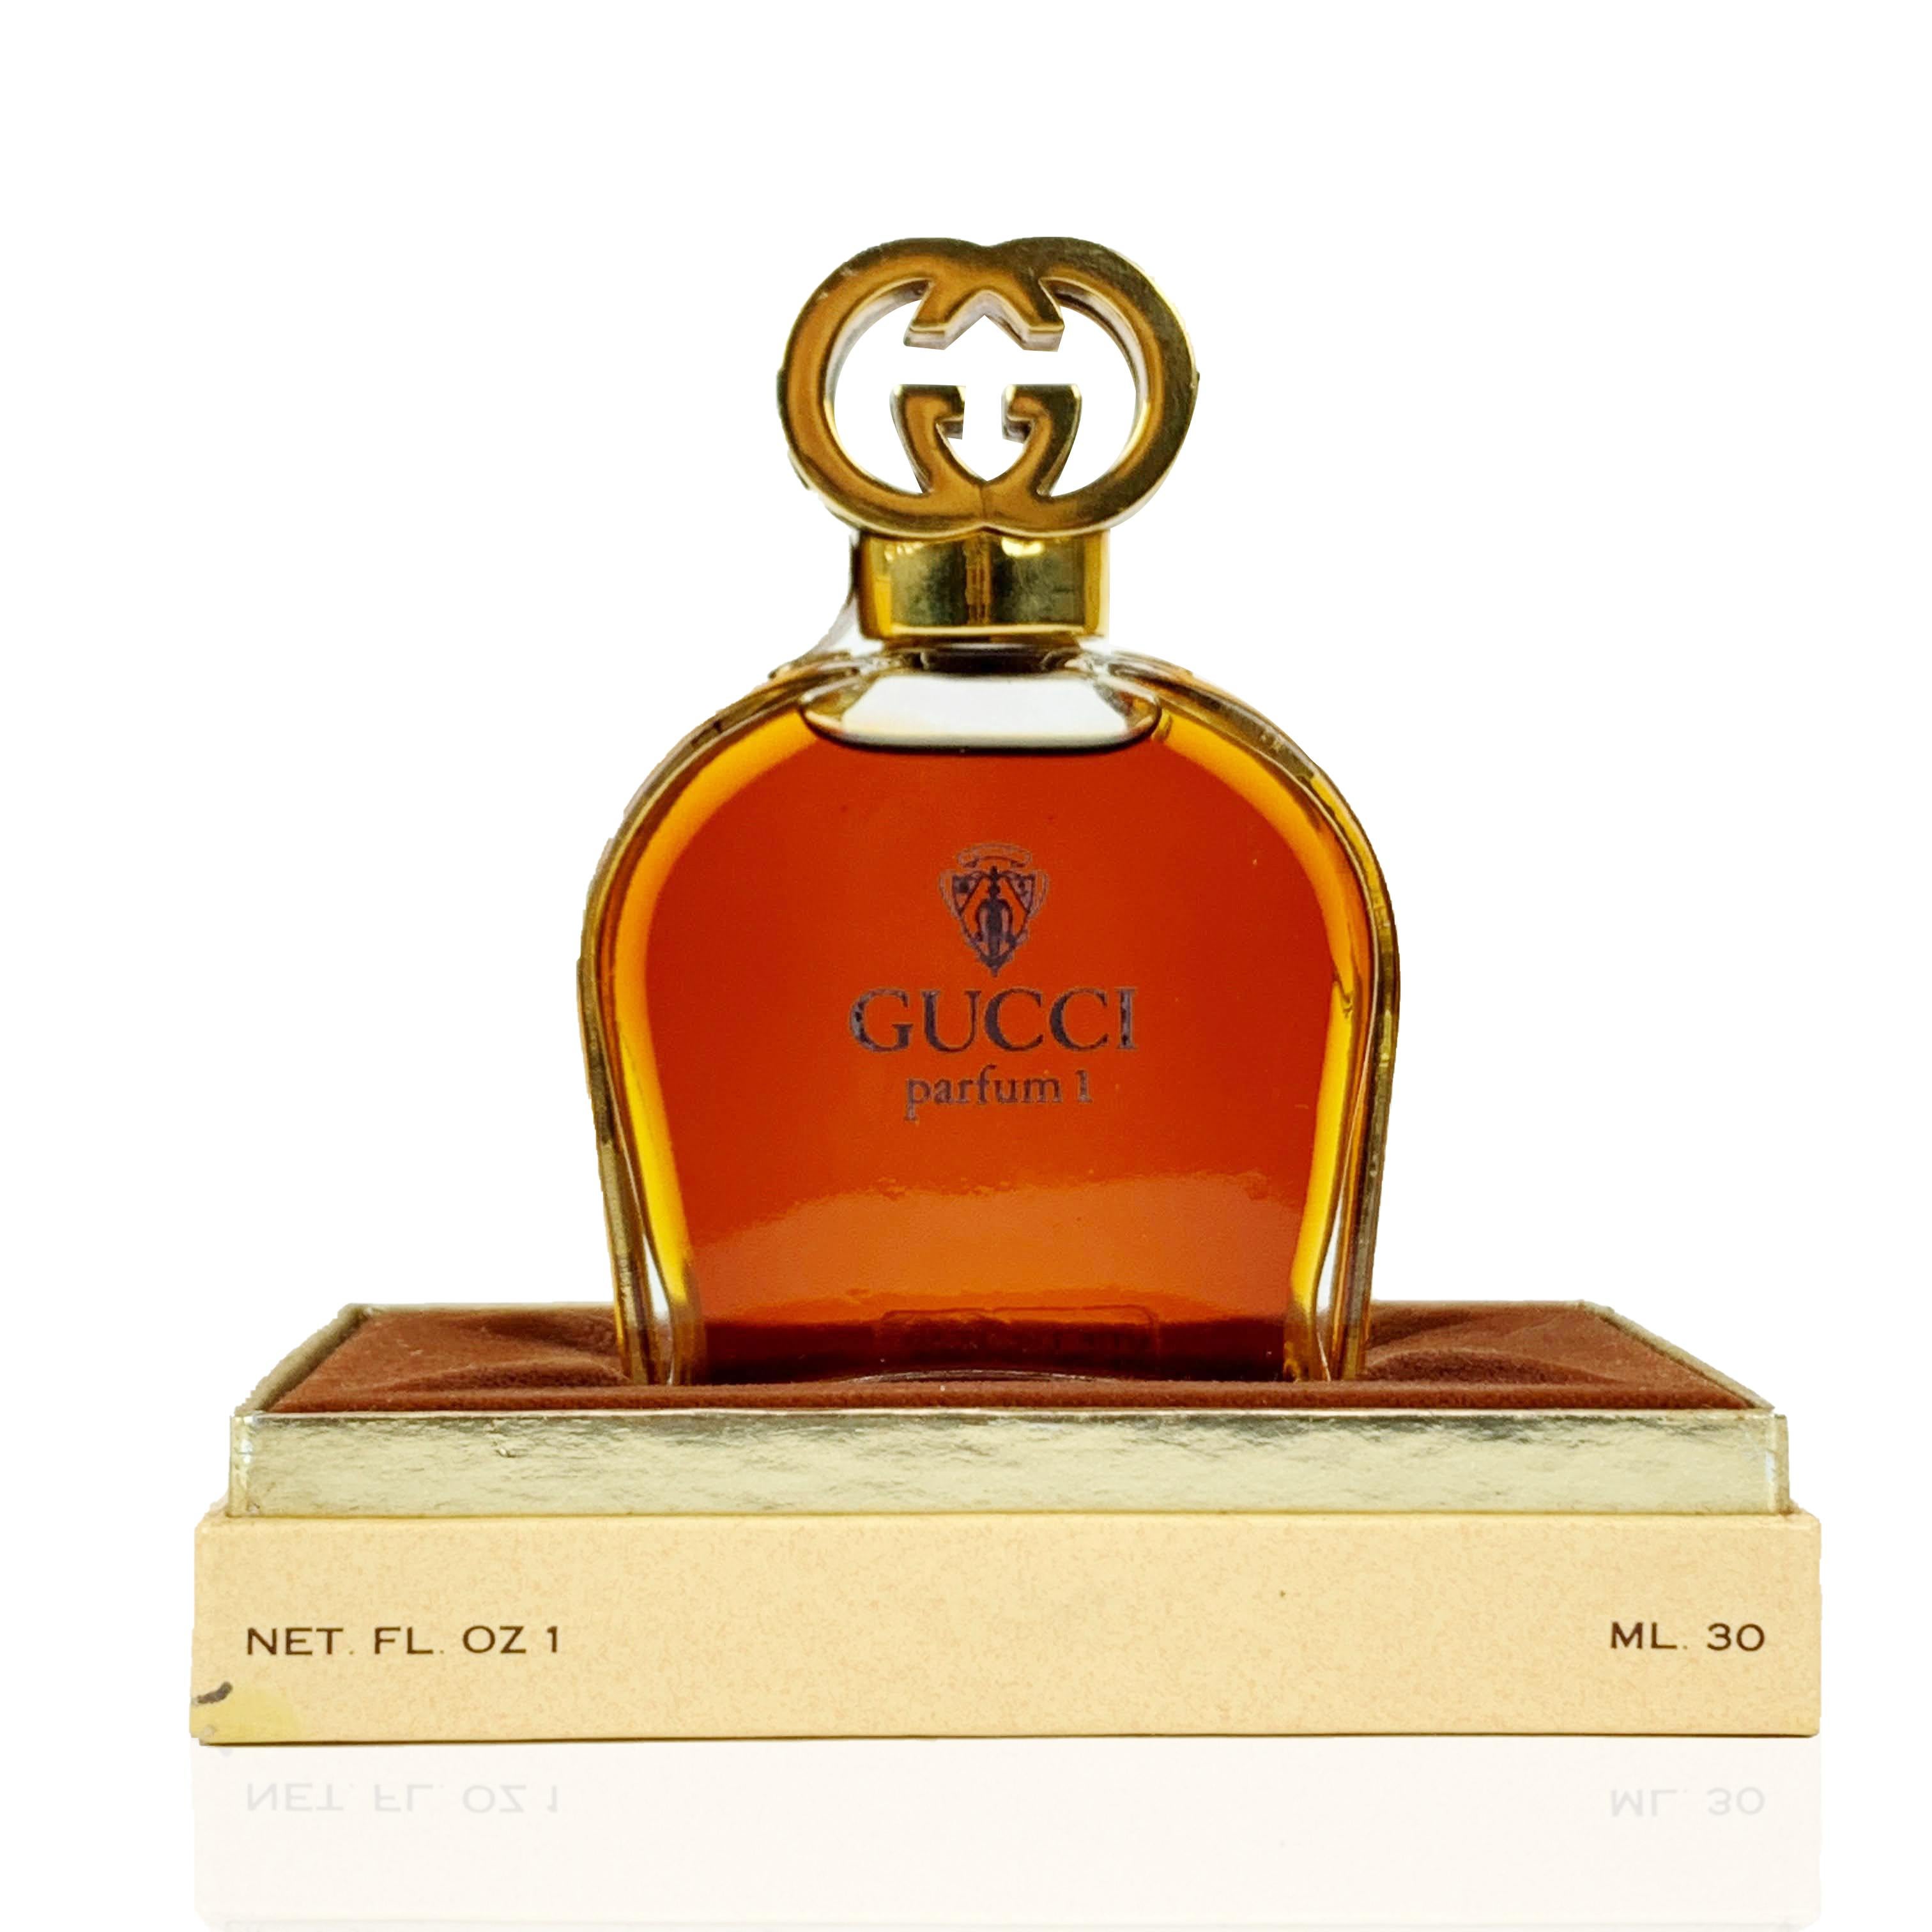 Very rare 'Gucci Parfum 1' 1oz/ 30ml bottle in its original presentation box. The bottle is embellished with iconic green/red/green enamel stripes on the sides. Gold metal GG - GUCCI logo cap. Gucci No 1 Parfum by Gucci is a floral chypre fragrance